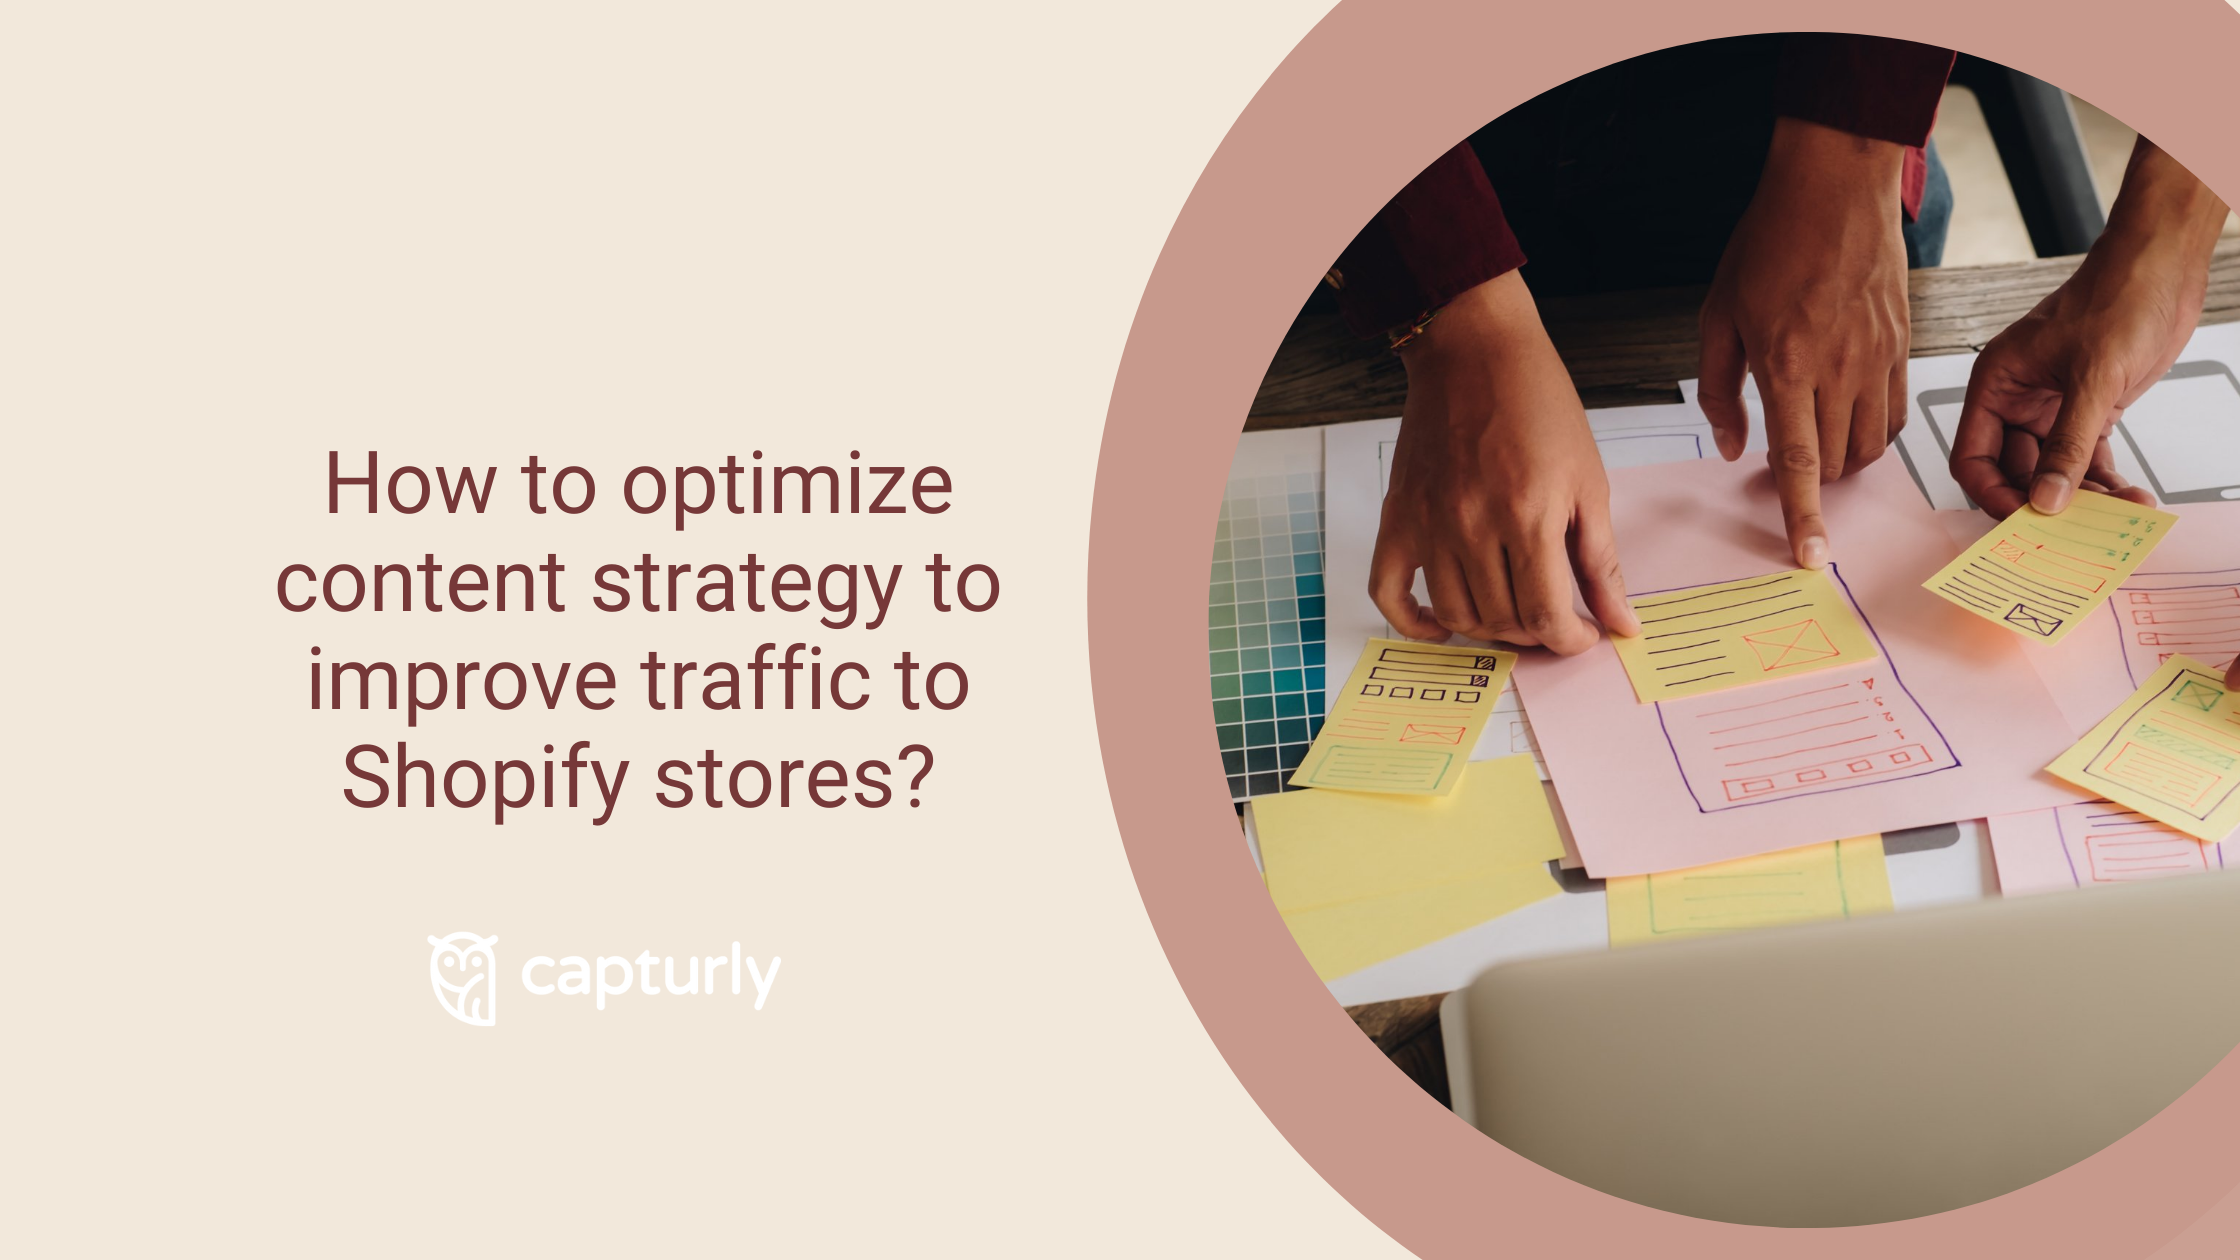 How to optimize content strategy to improve traffic to Shopify stores